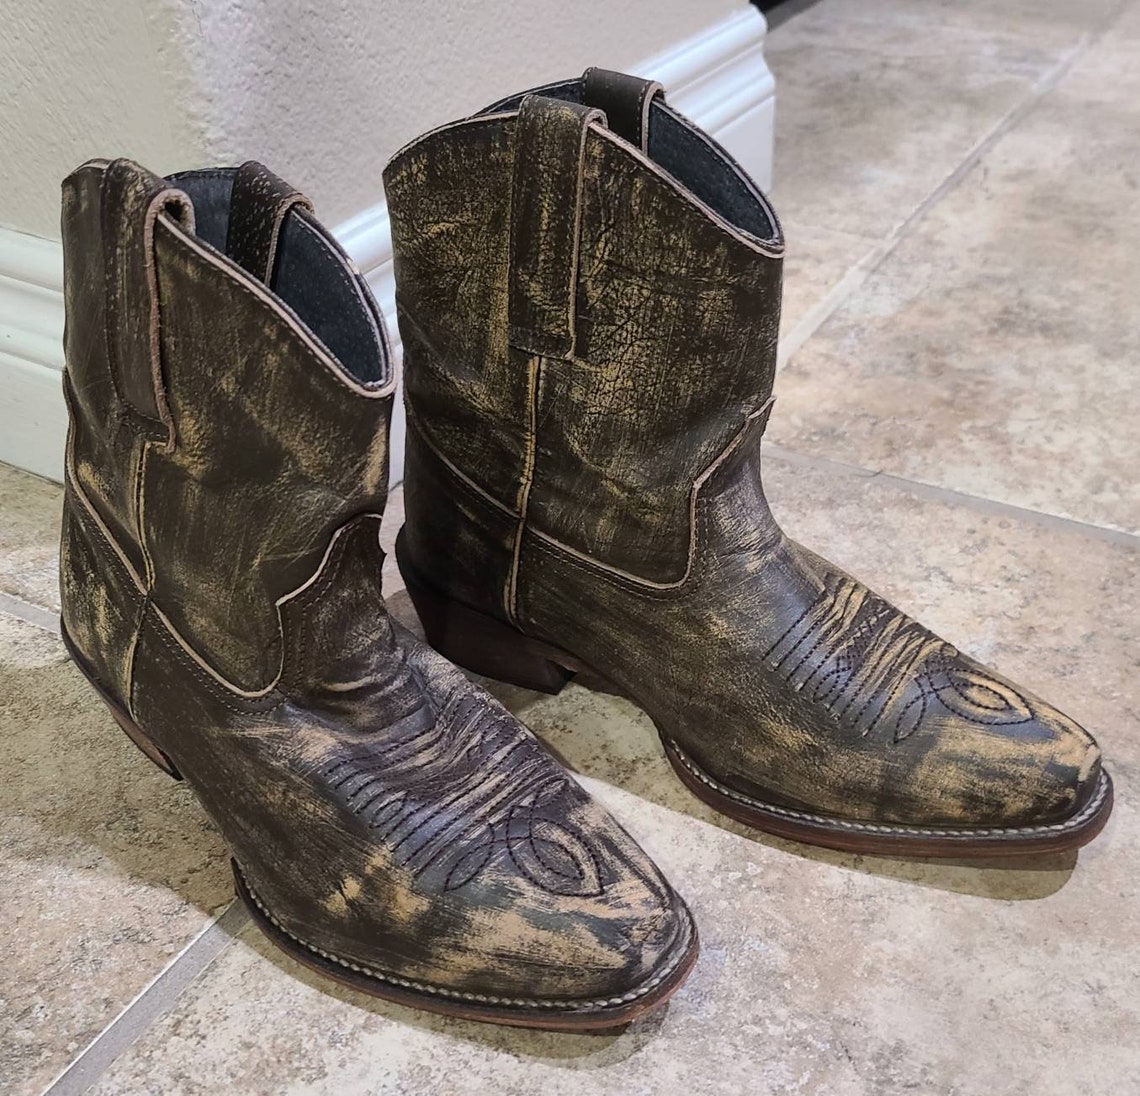 Roper Dusty Distressed Snip Toe Womens Western Cowboy Boots | Etsy